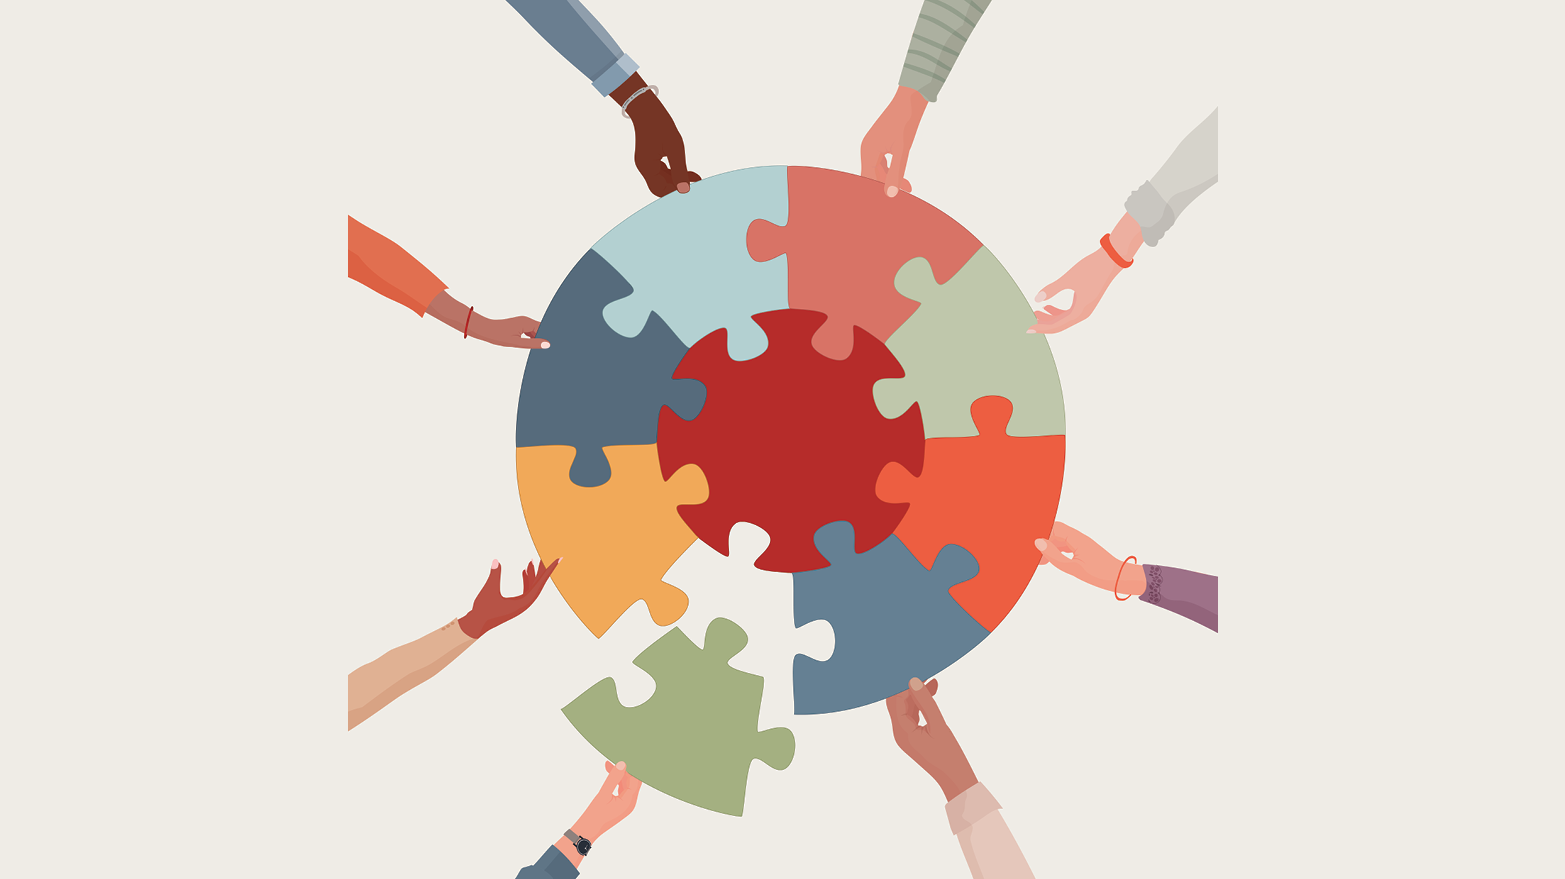 Illustration of a circular puzzle being put together by many different hands.